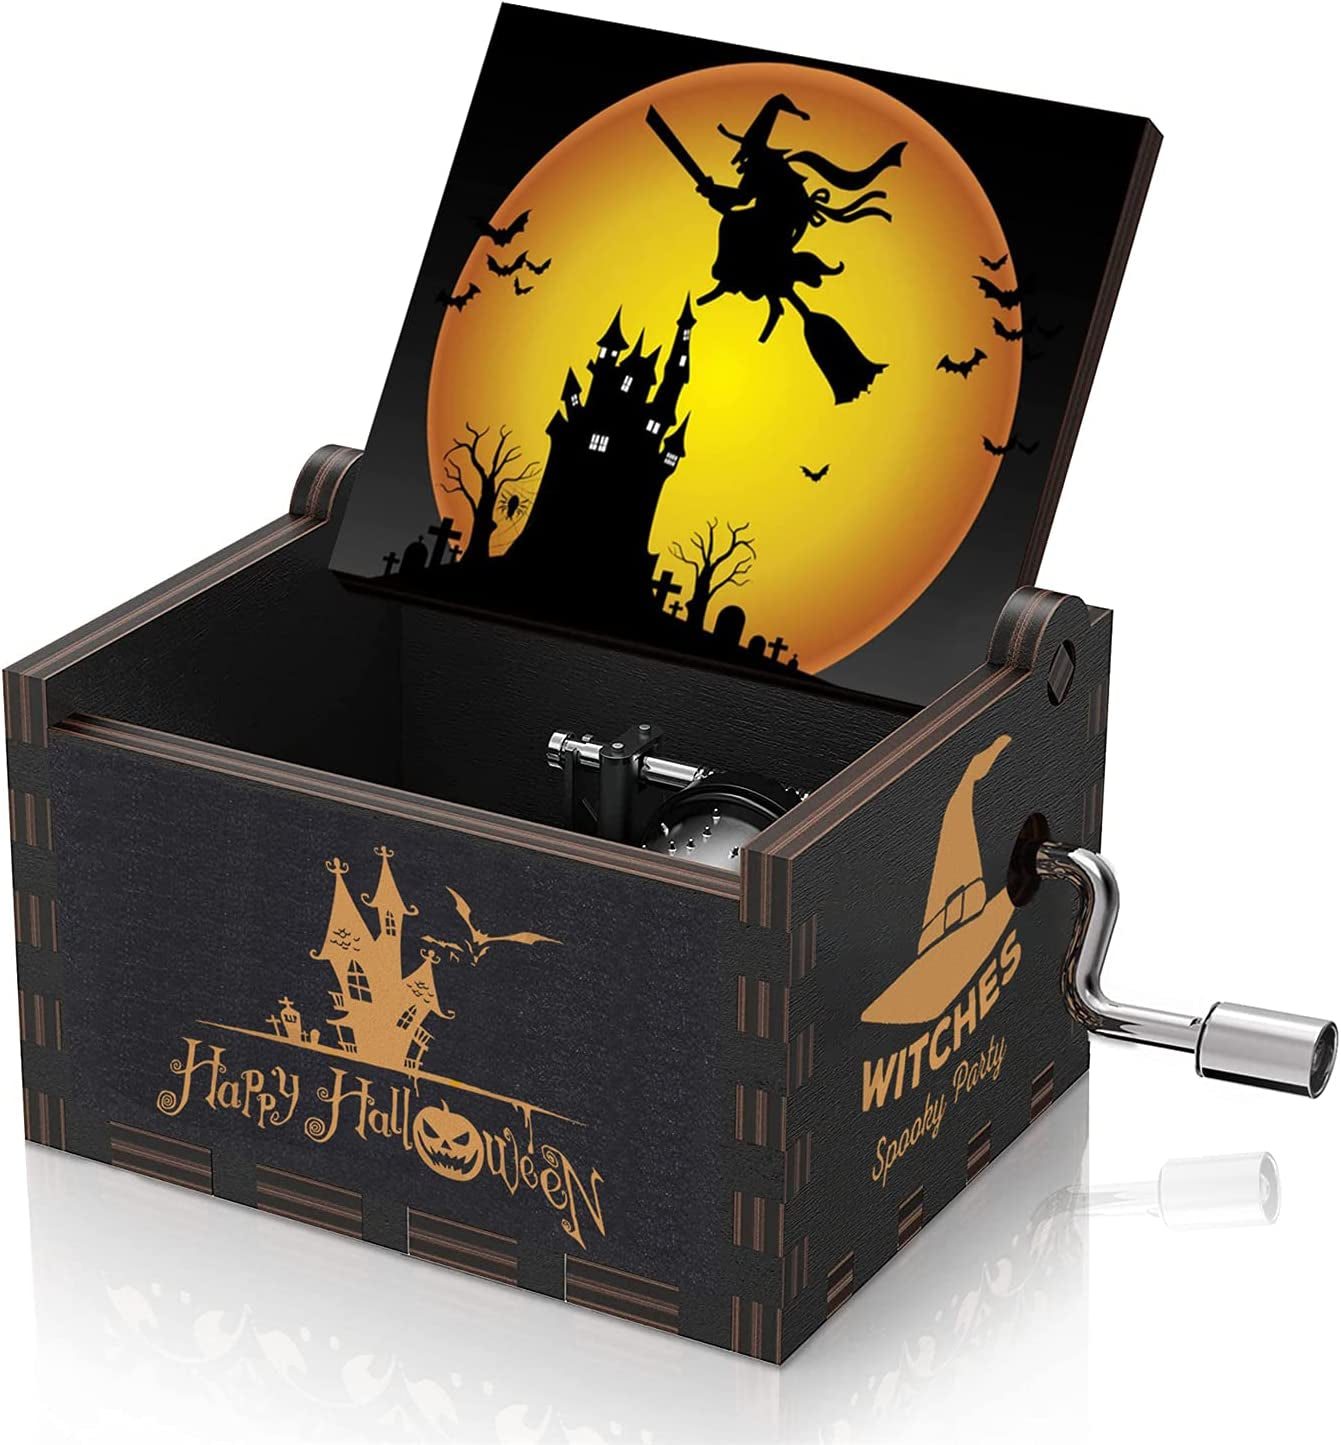 Evoke Halloween Magic with our Mini Halloween Music Box! Featuring 'The Nightmare Before Christmas' Wood Hand Crank Musical Box that plays the enchanting 'This Is Halloween' Tune. A Perfect Creative Gift for Christmas and Halloween Decorations.